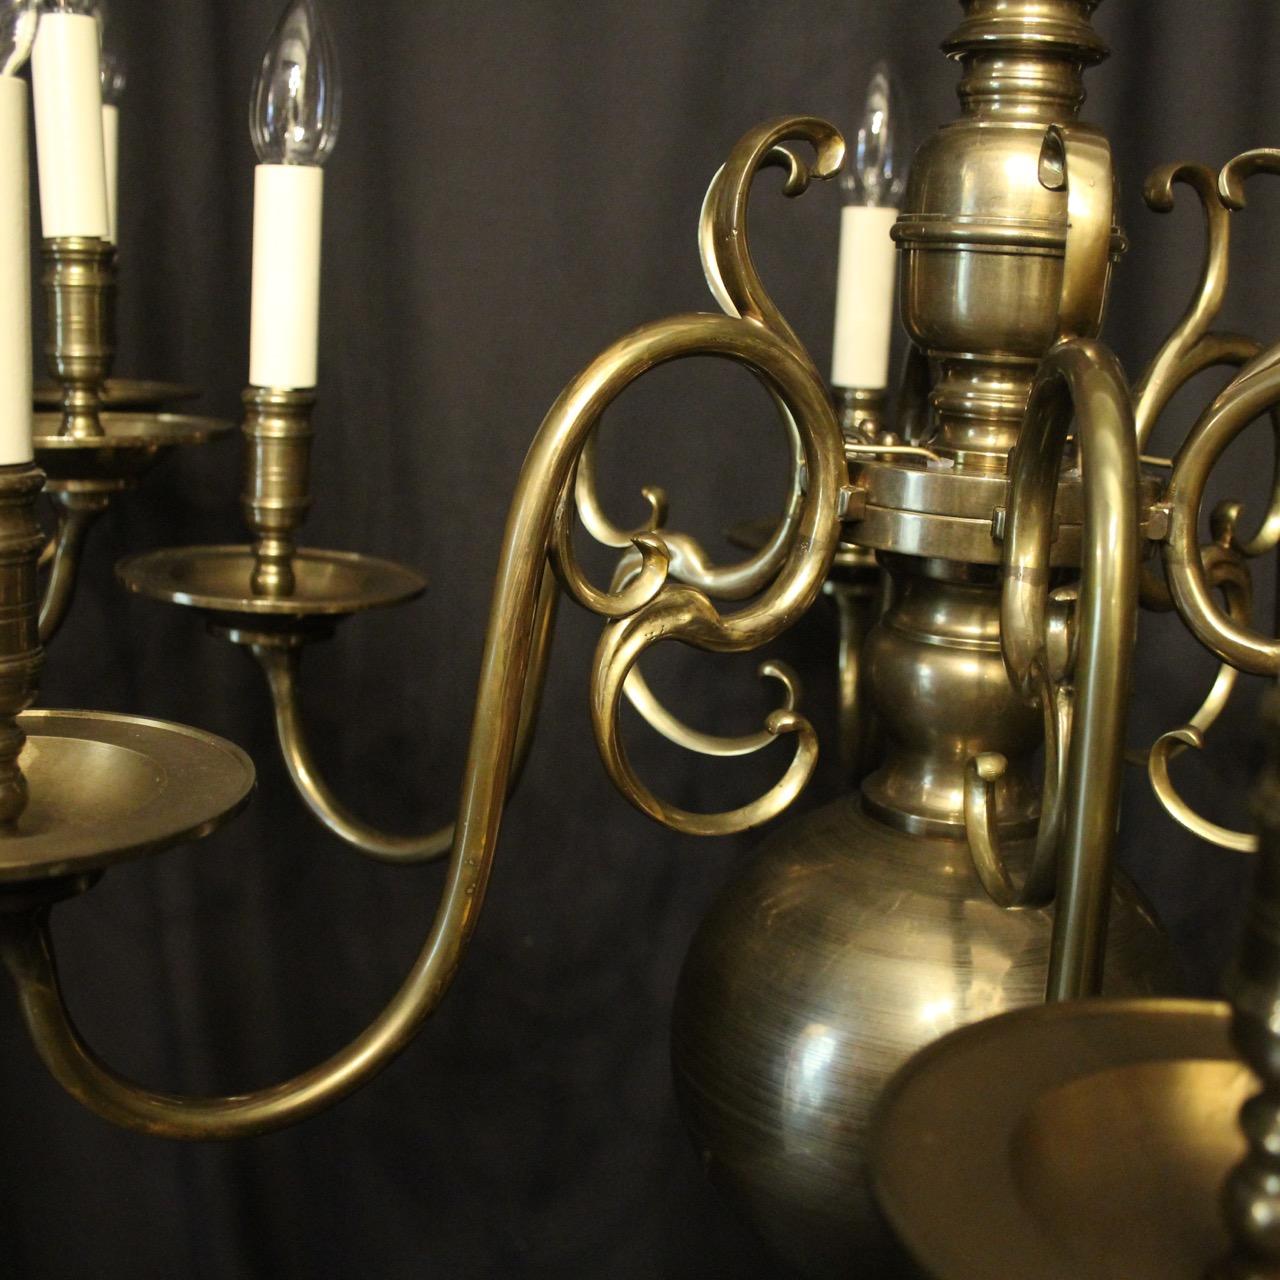 pair of antique chandeliers